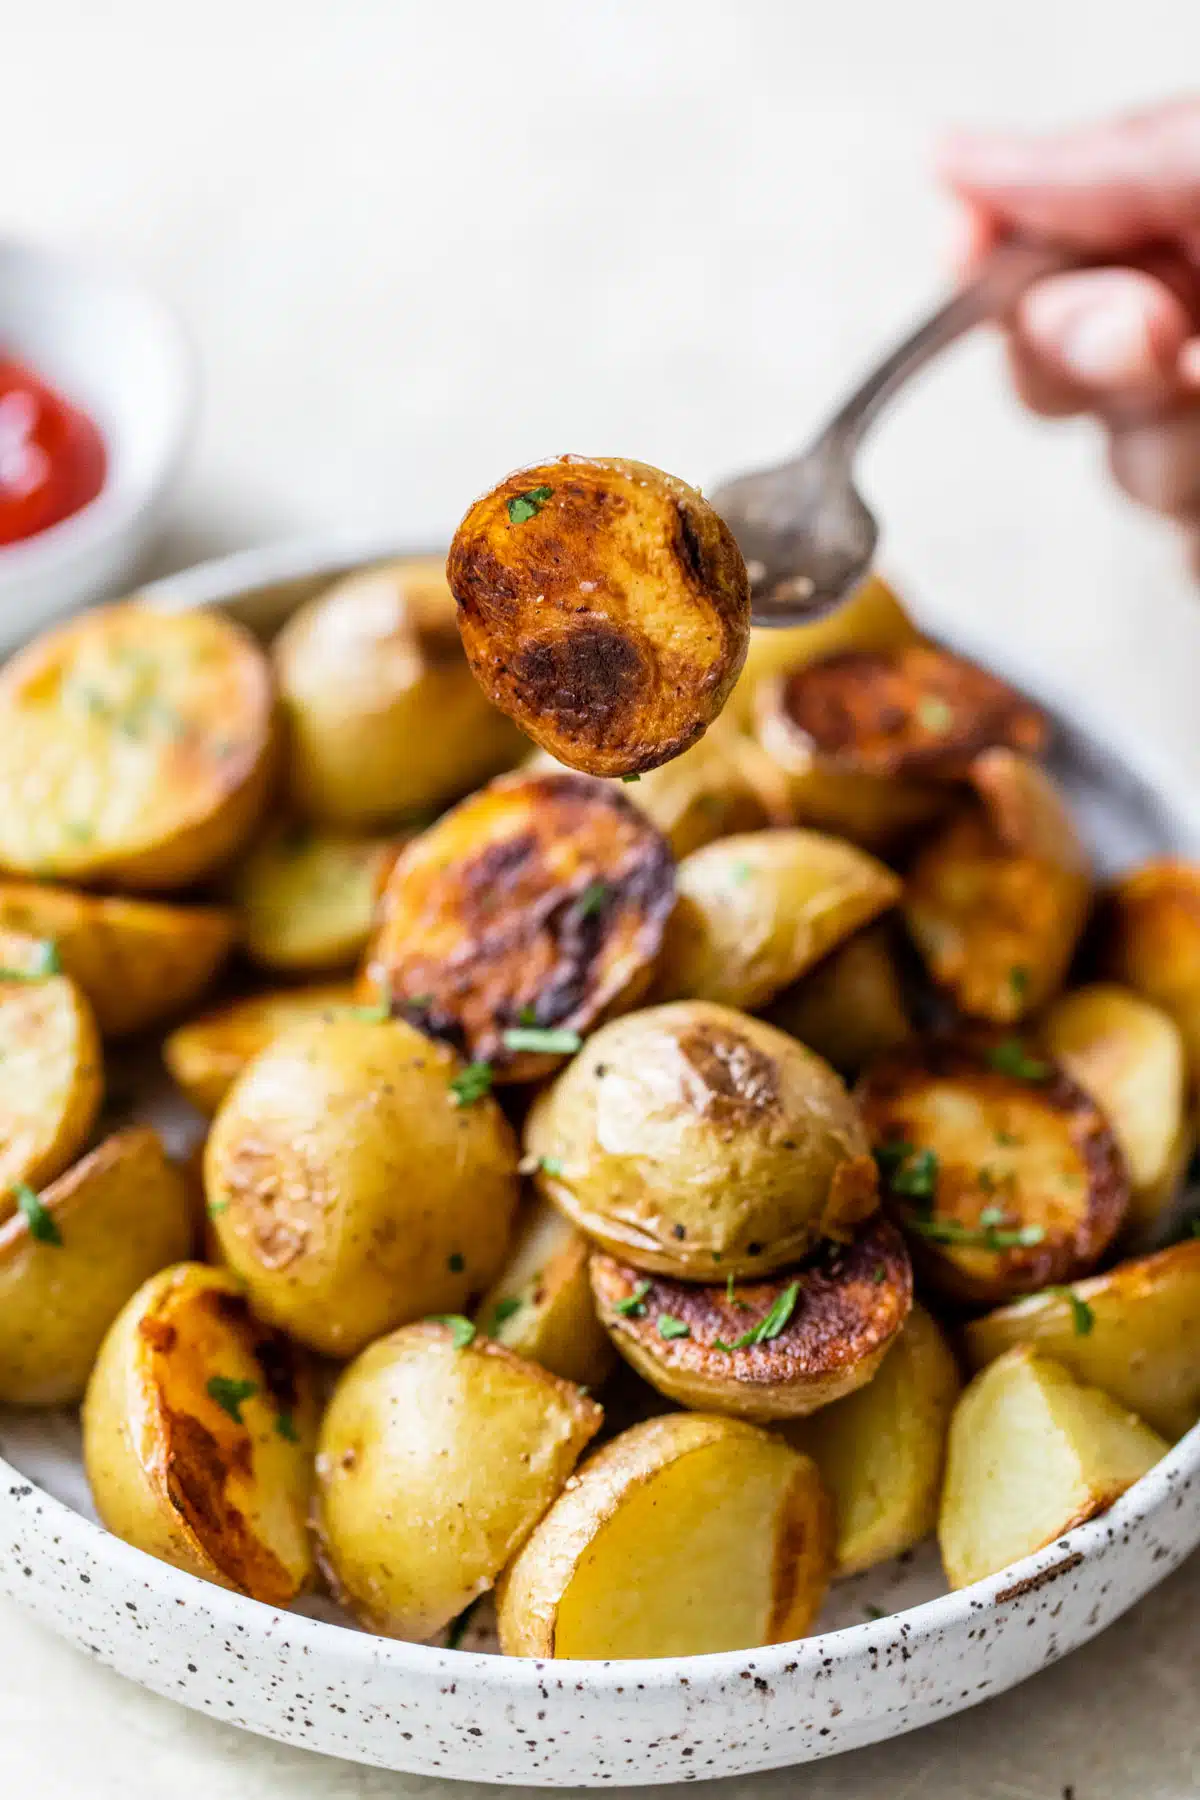 grilled potatoes on a plate with a potato pierced with a fork